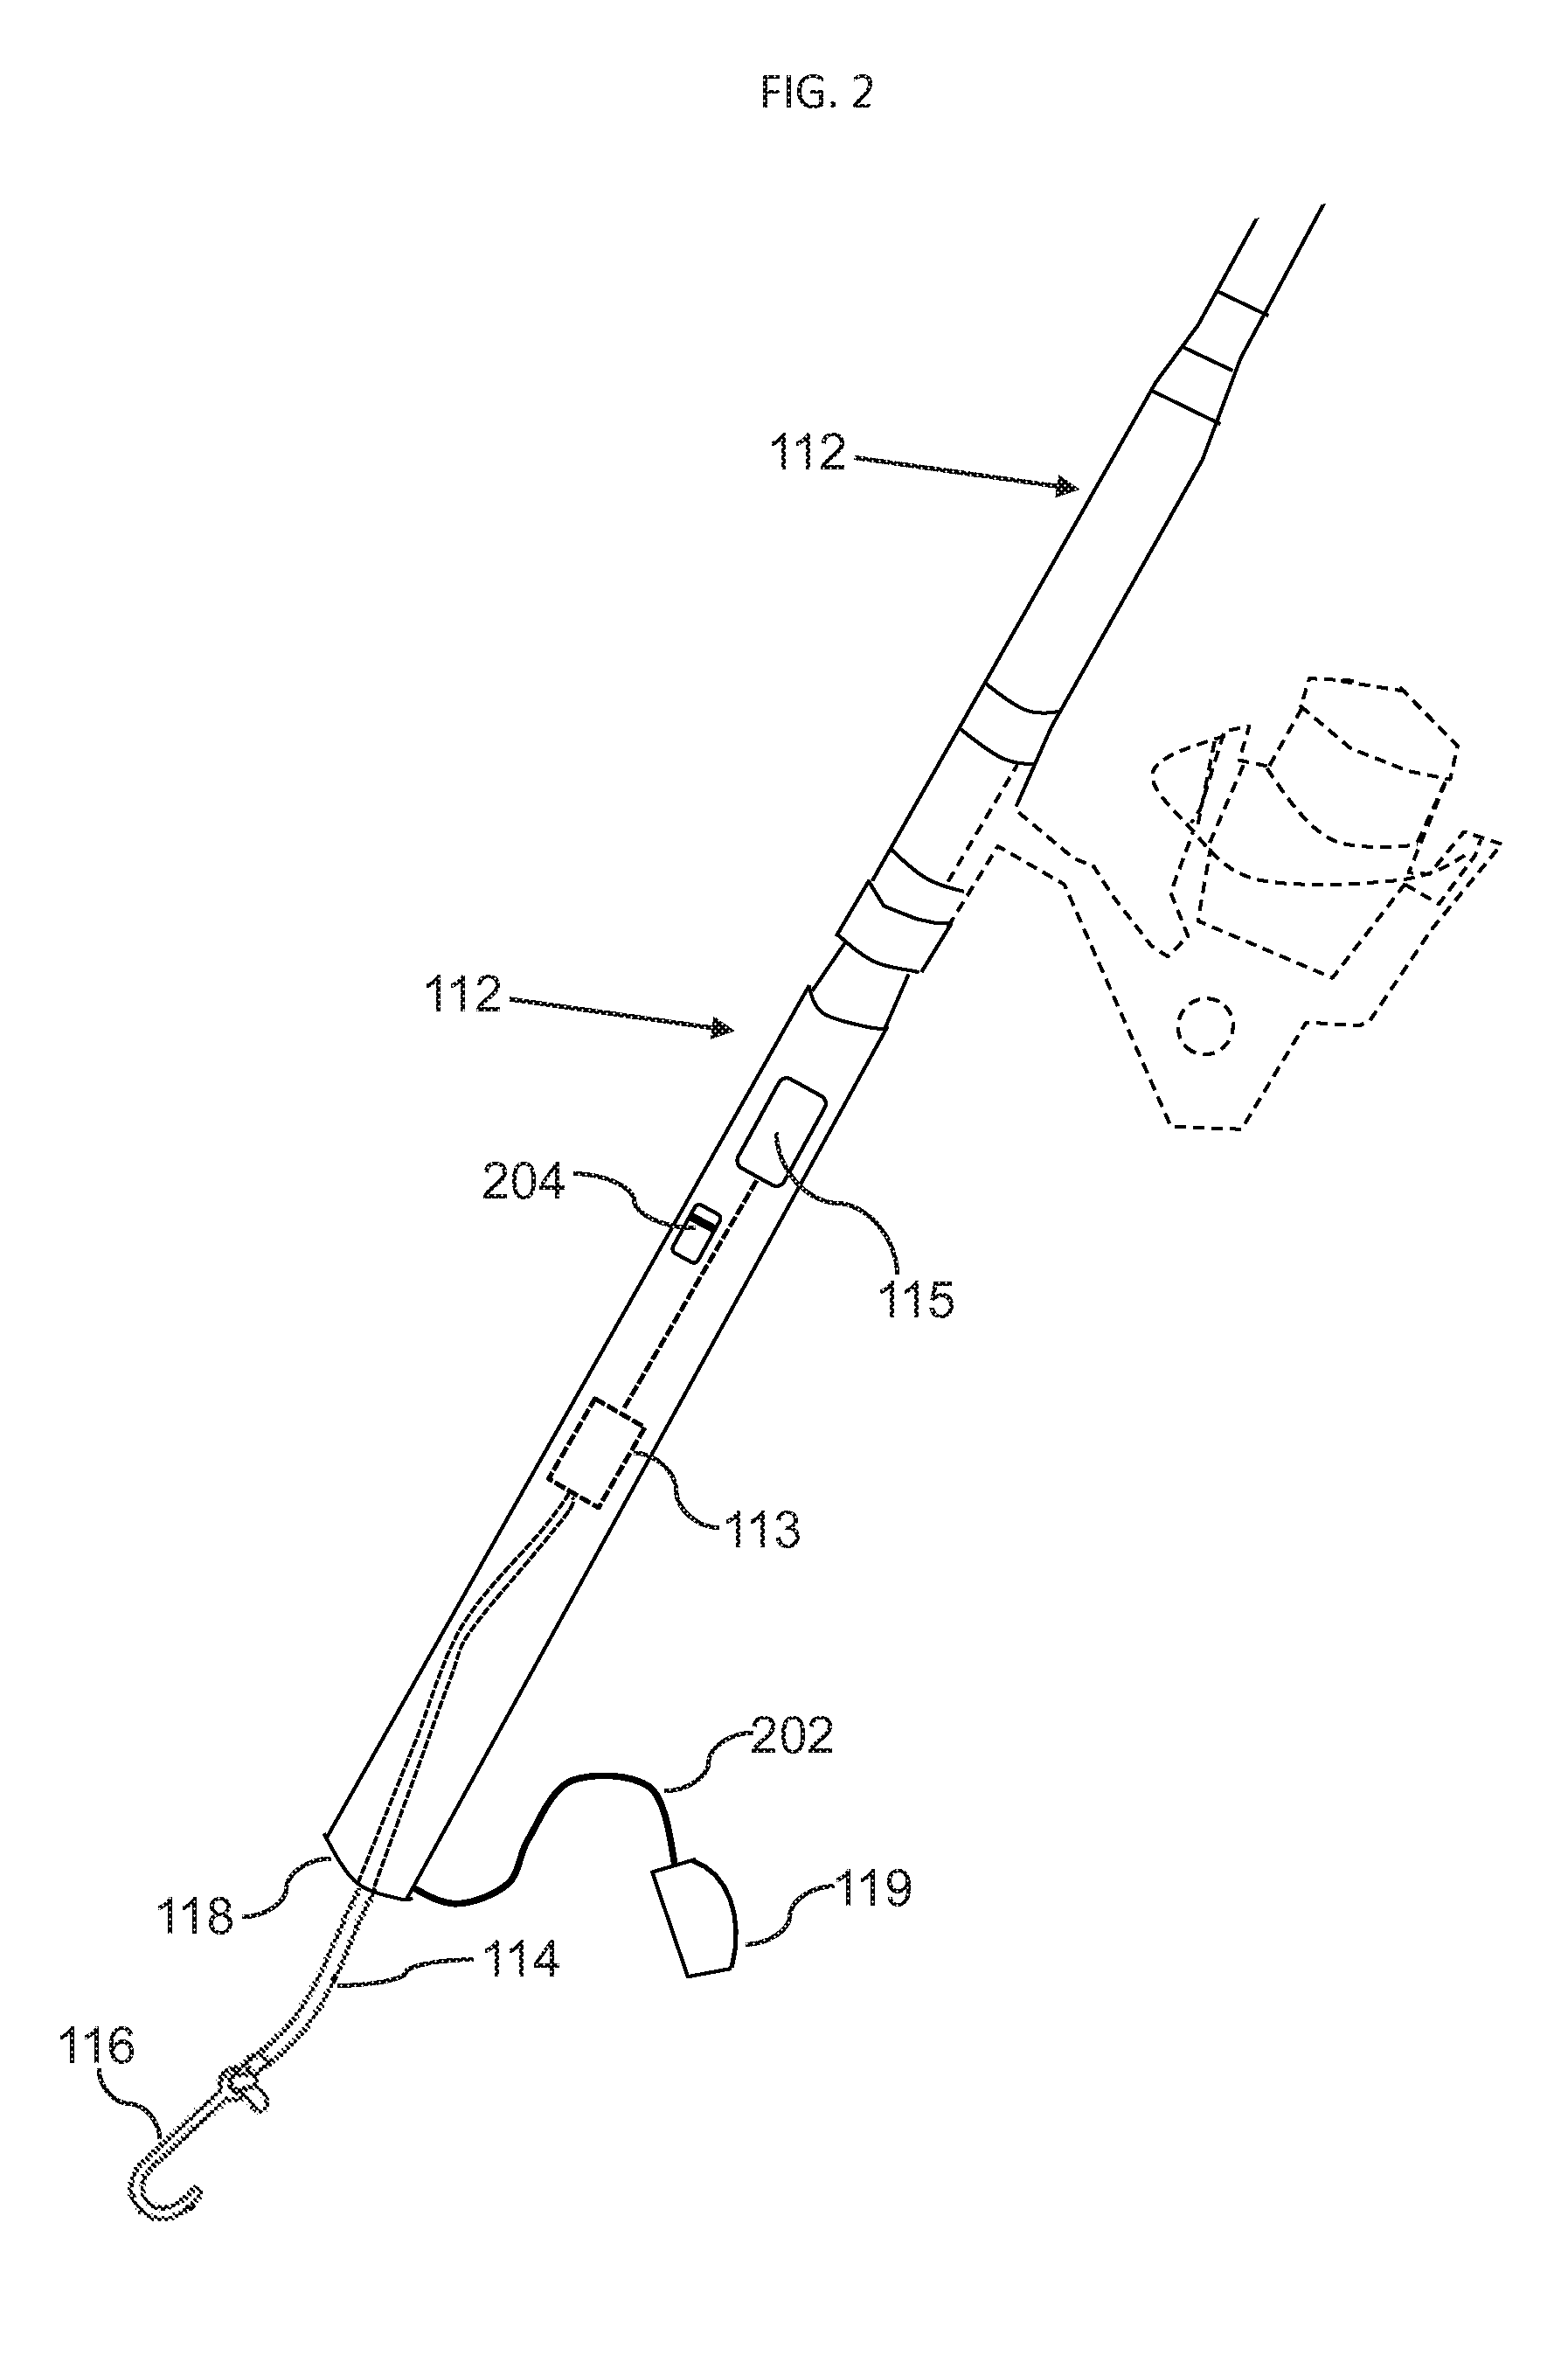 Fishing rod with built-in measuring devices